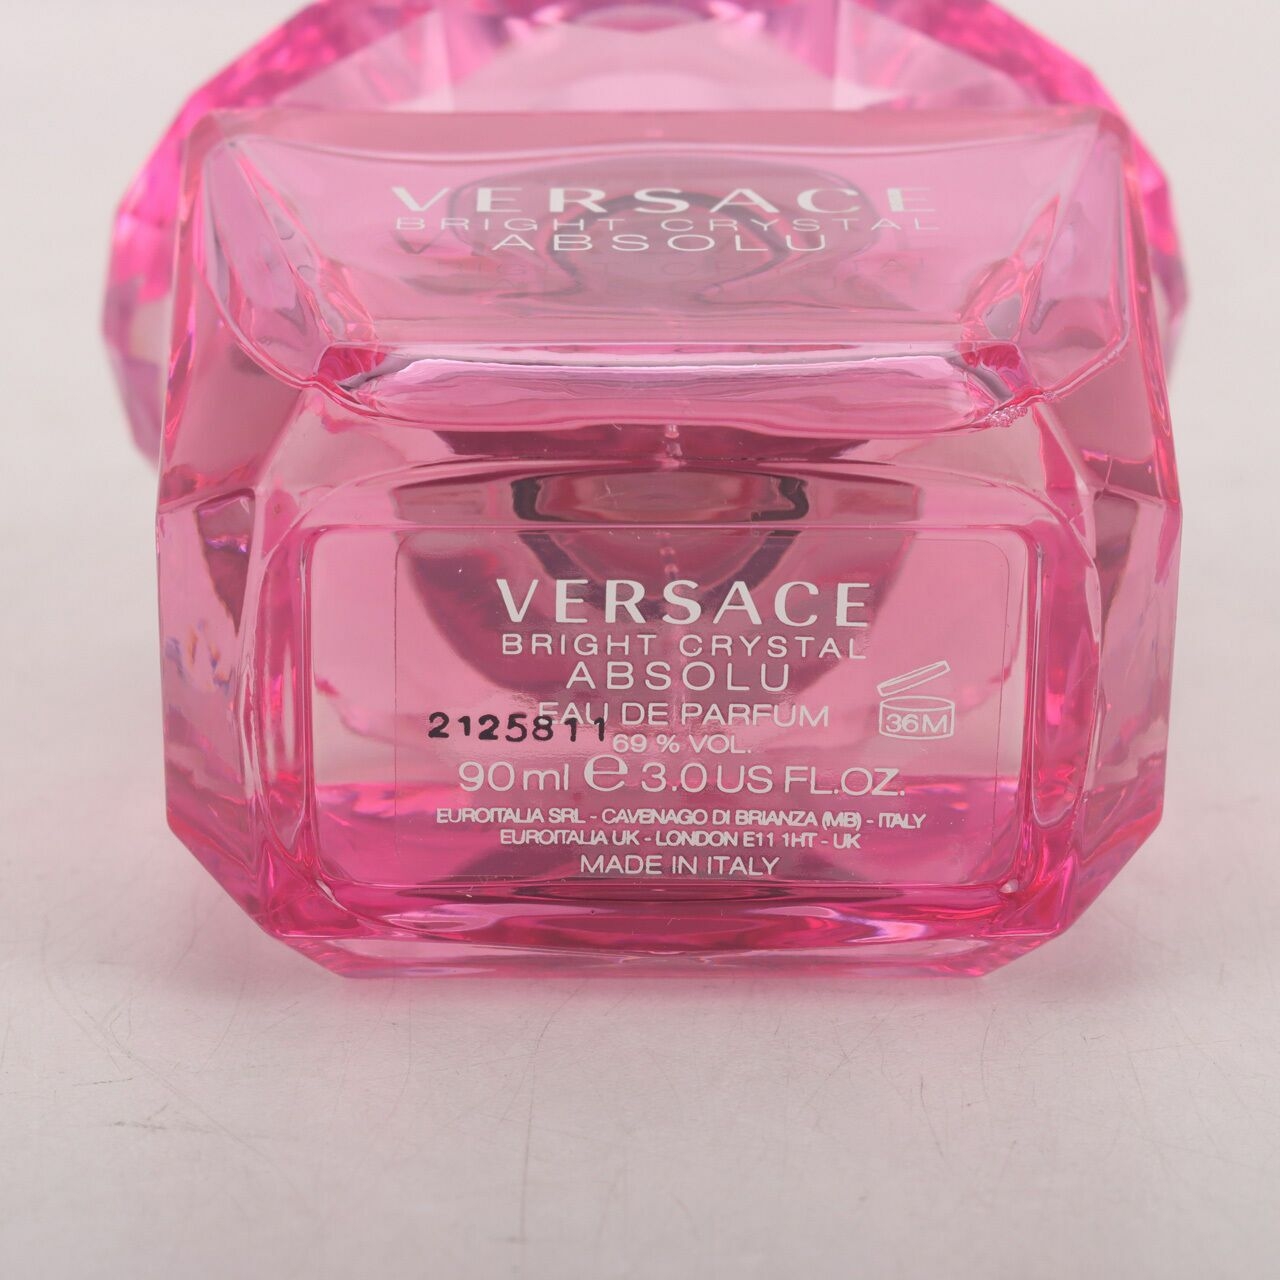 Versace Bright Crystal For Women Edt 90ml Fragrance